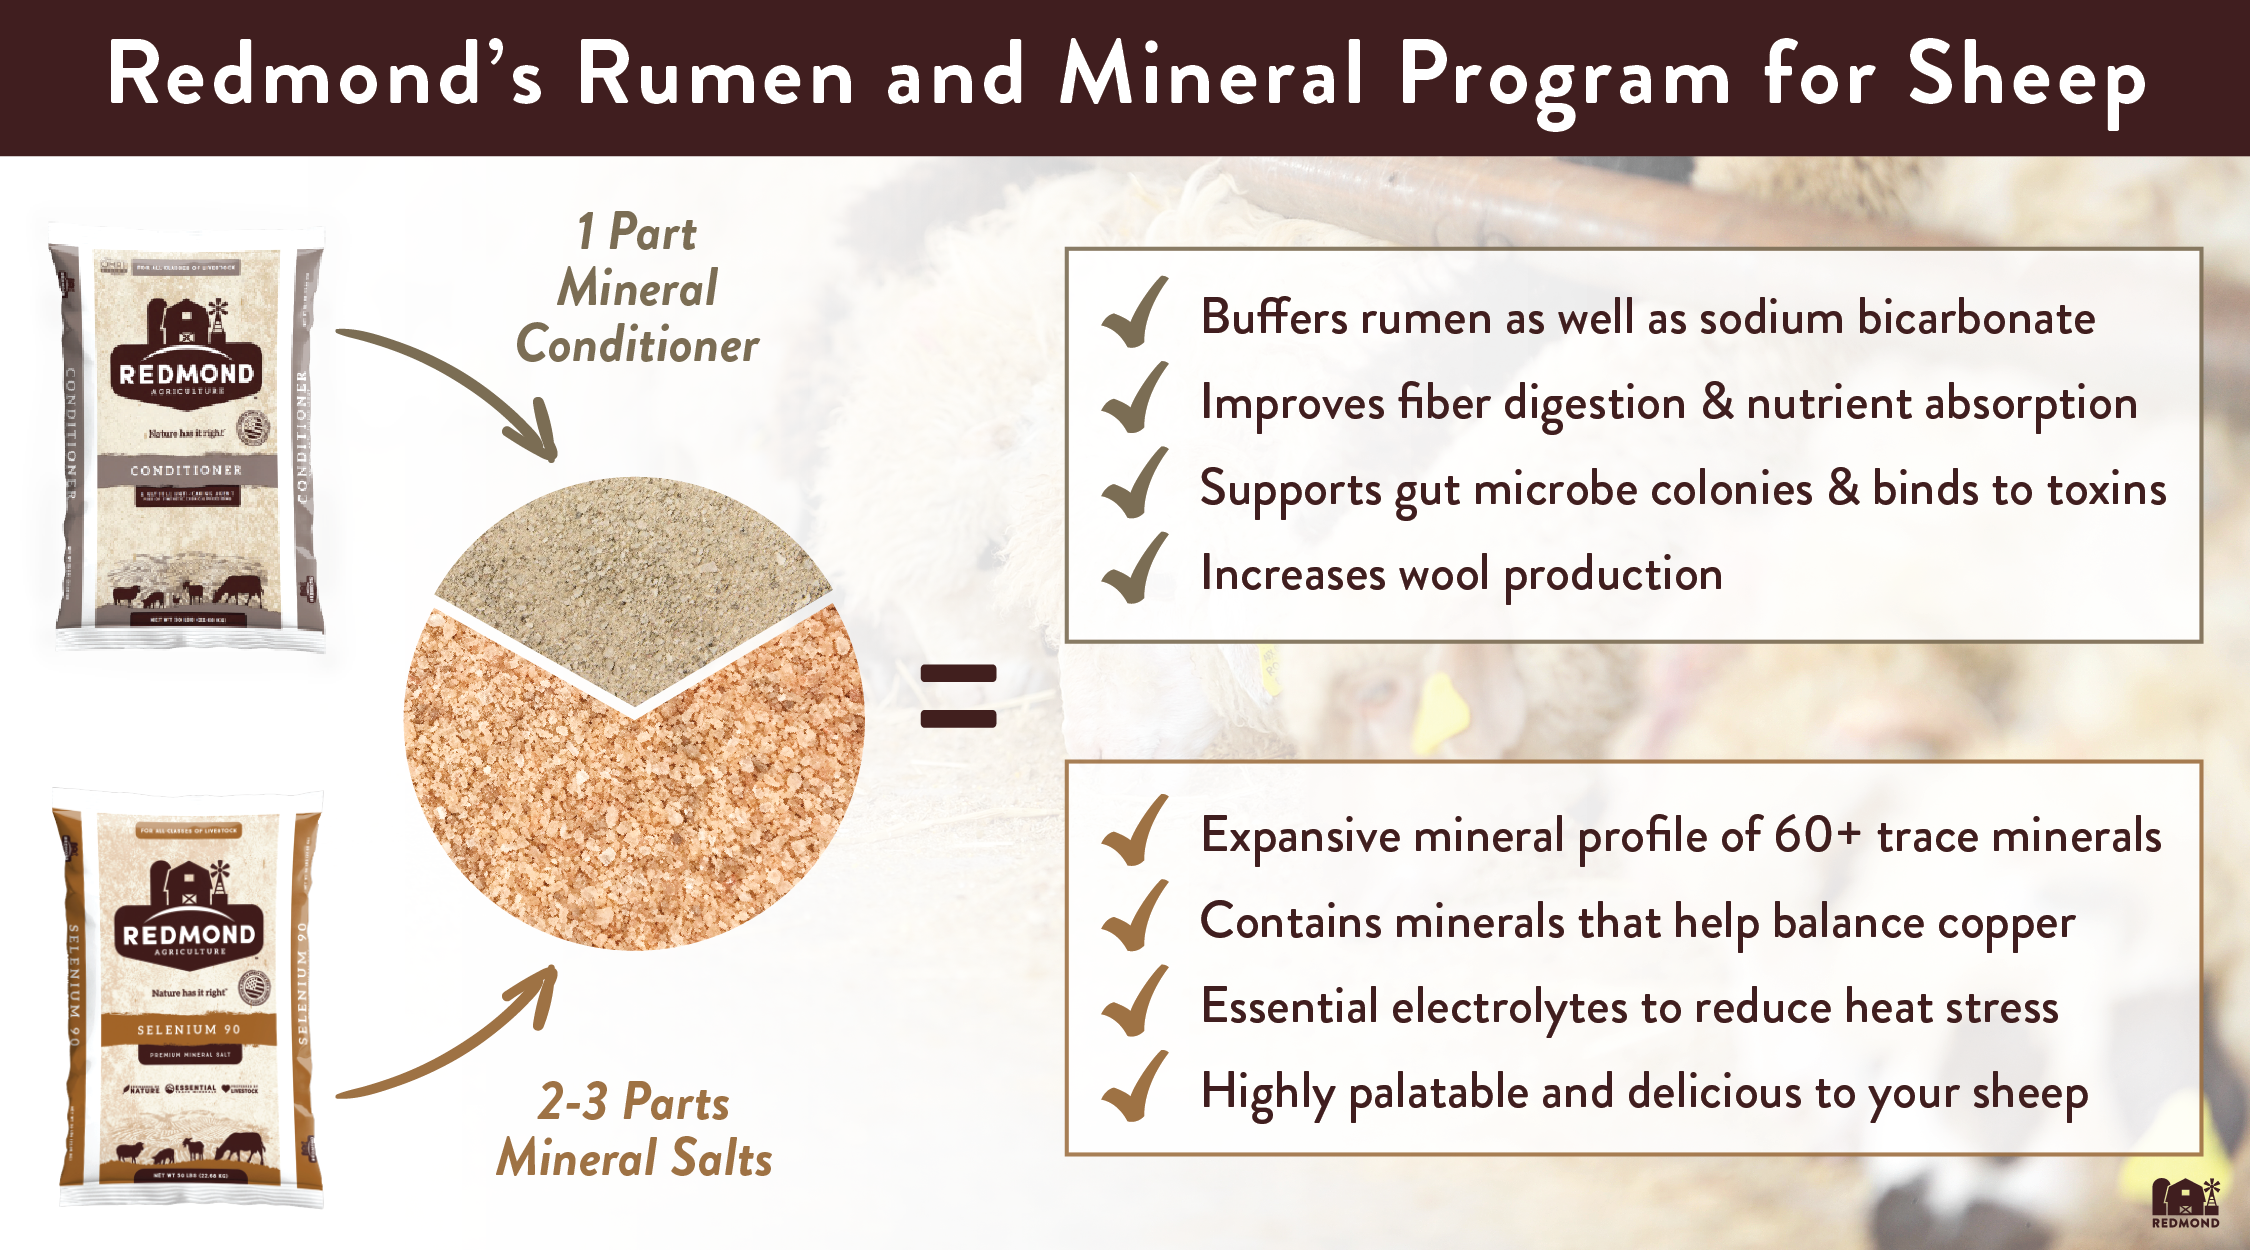 Redmond's rumen and mineral program for sheep